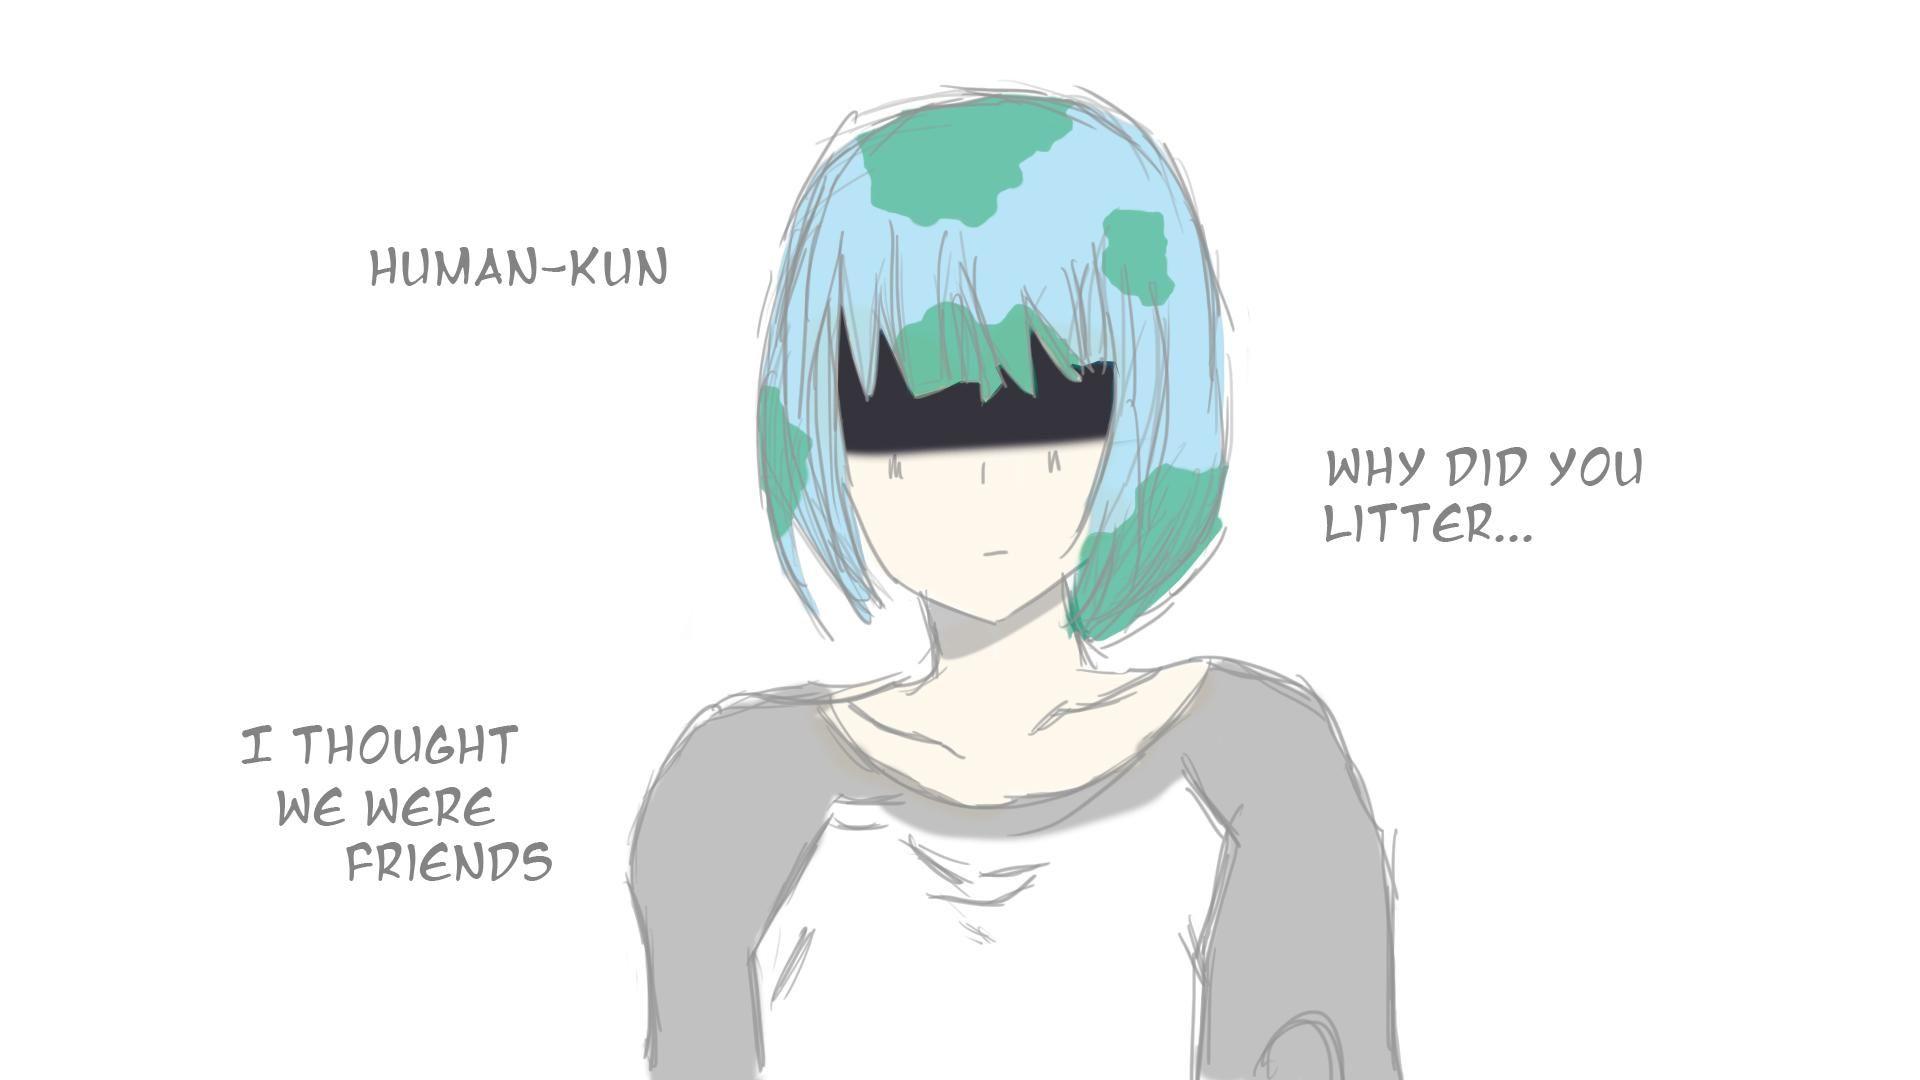 best Chan image on Pholder.com. Earthchan, Awwnime and Planetchan